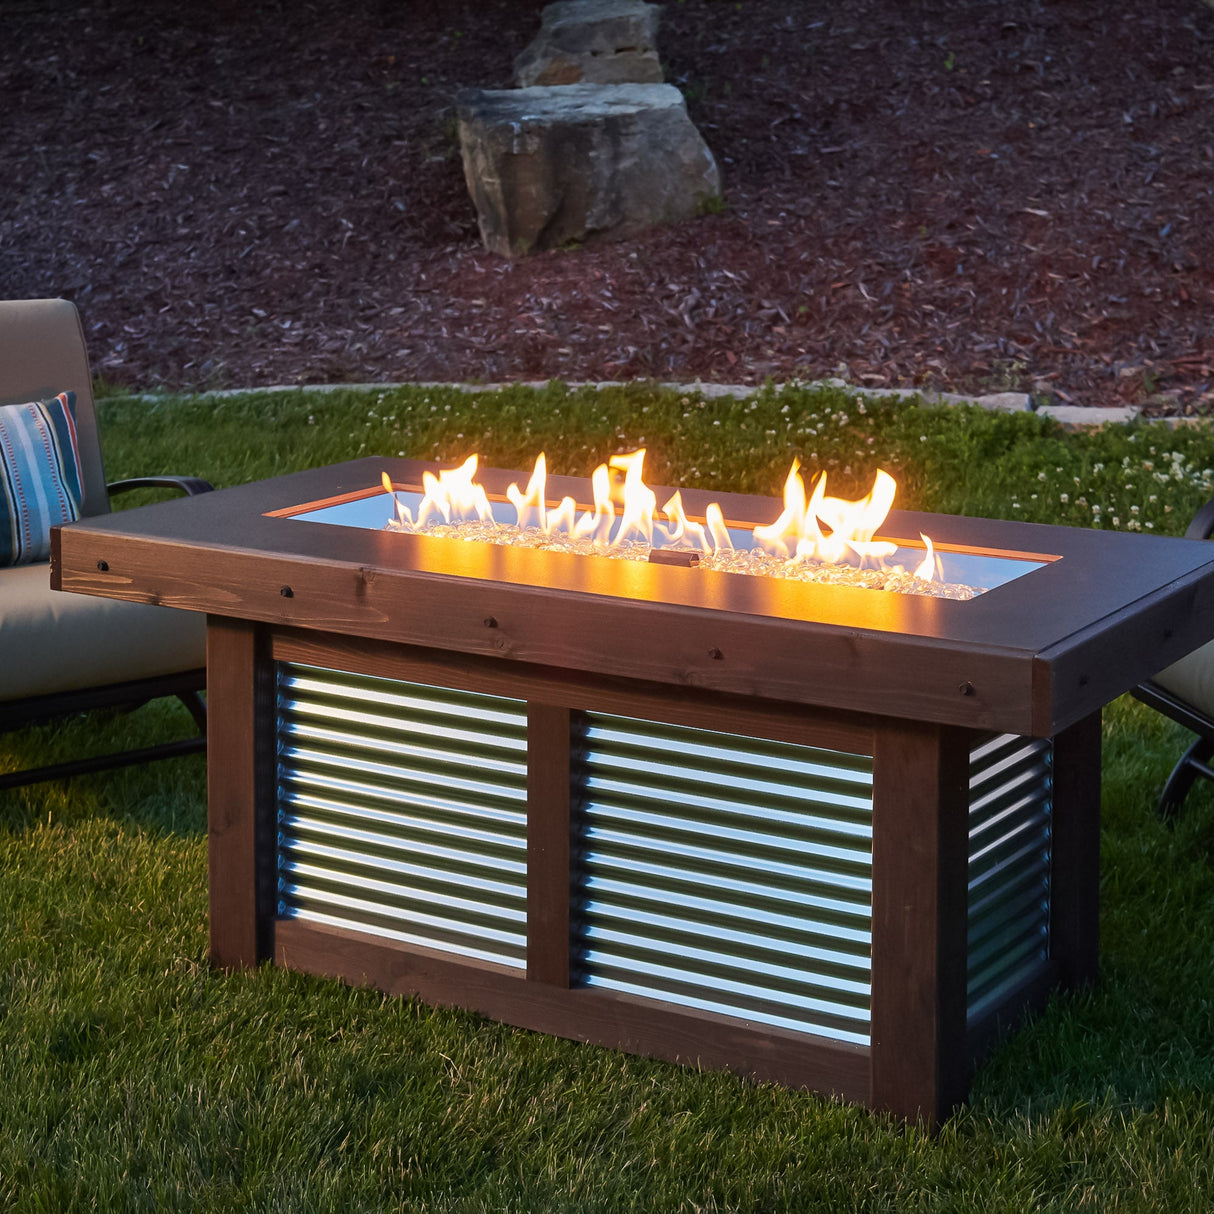 The Denali Brew Linear Gas Fire Pit Table with a large flame and placed in an outdoor backyard space